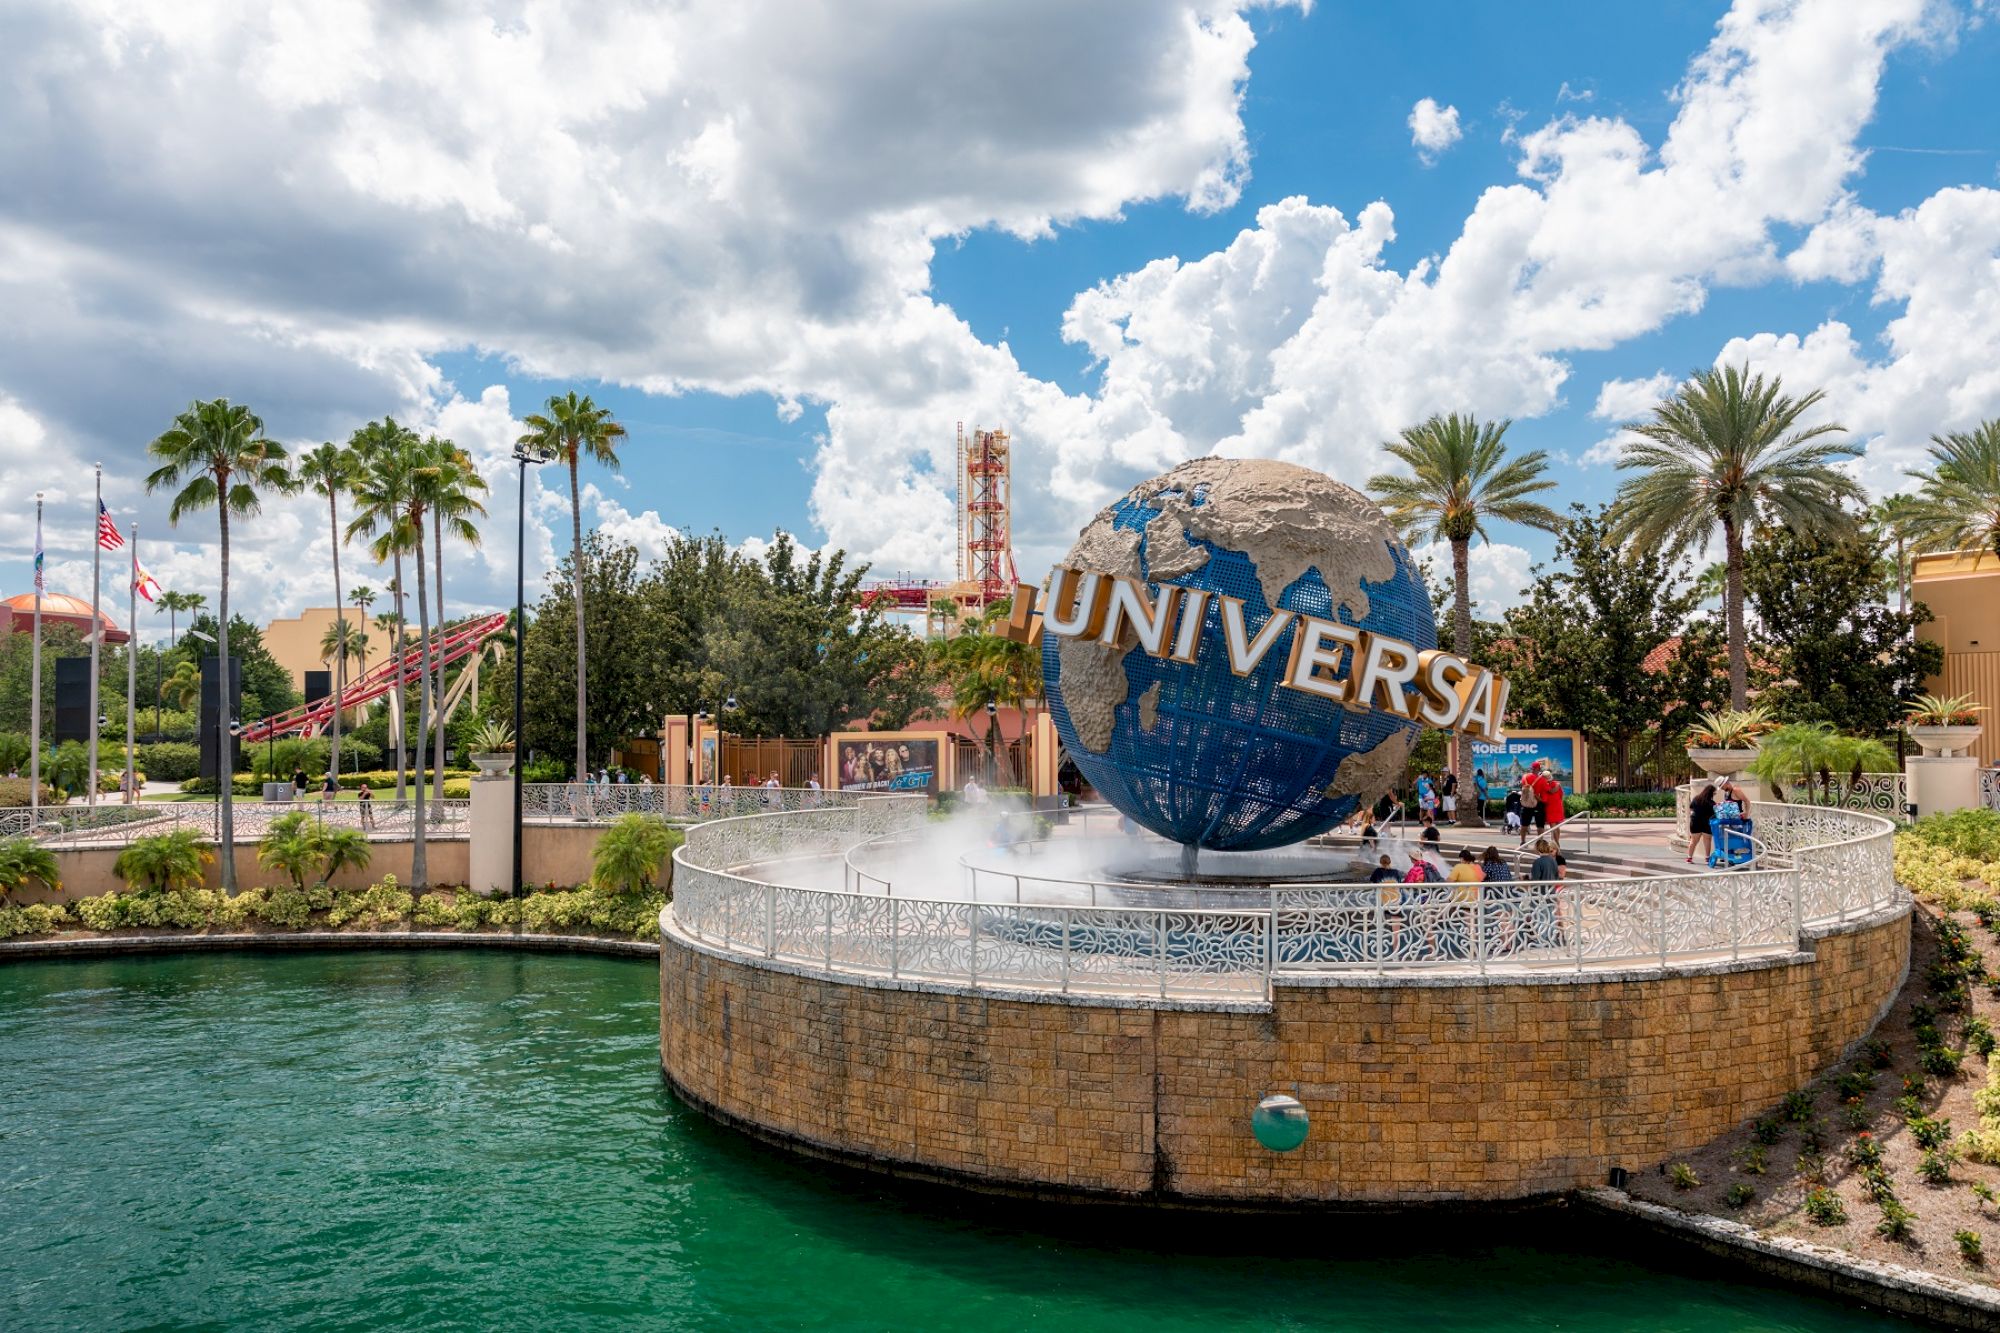 An amusement park scene with a large globe structure prominently displaying "Universal." Palm trees and water are visible in the foreground.